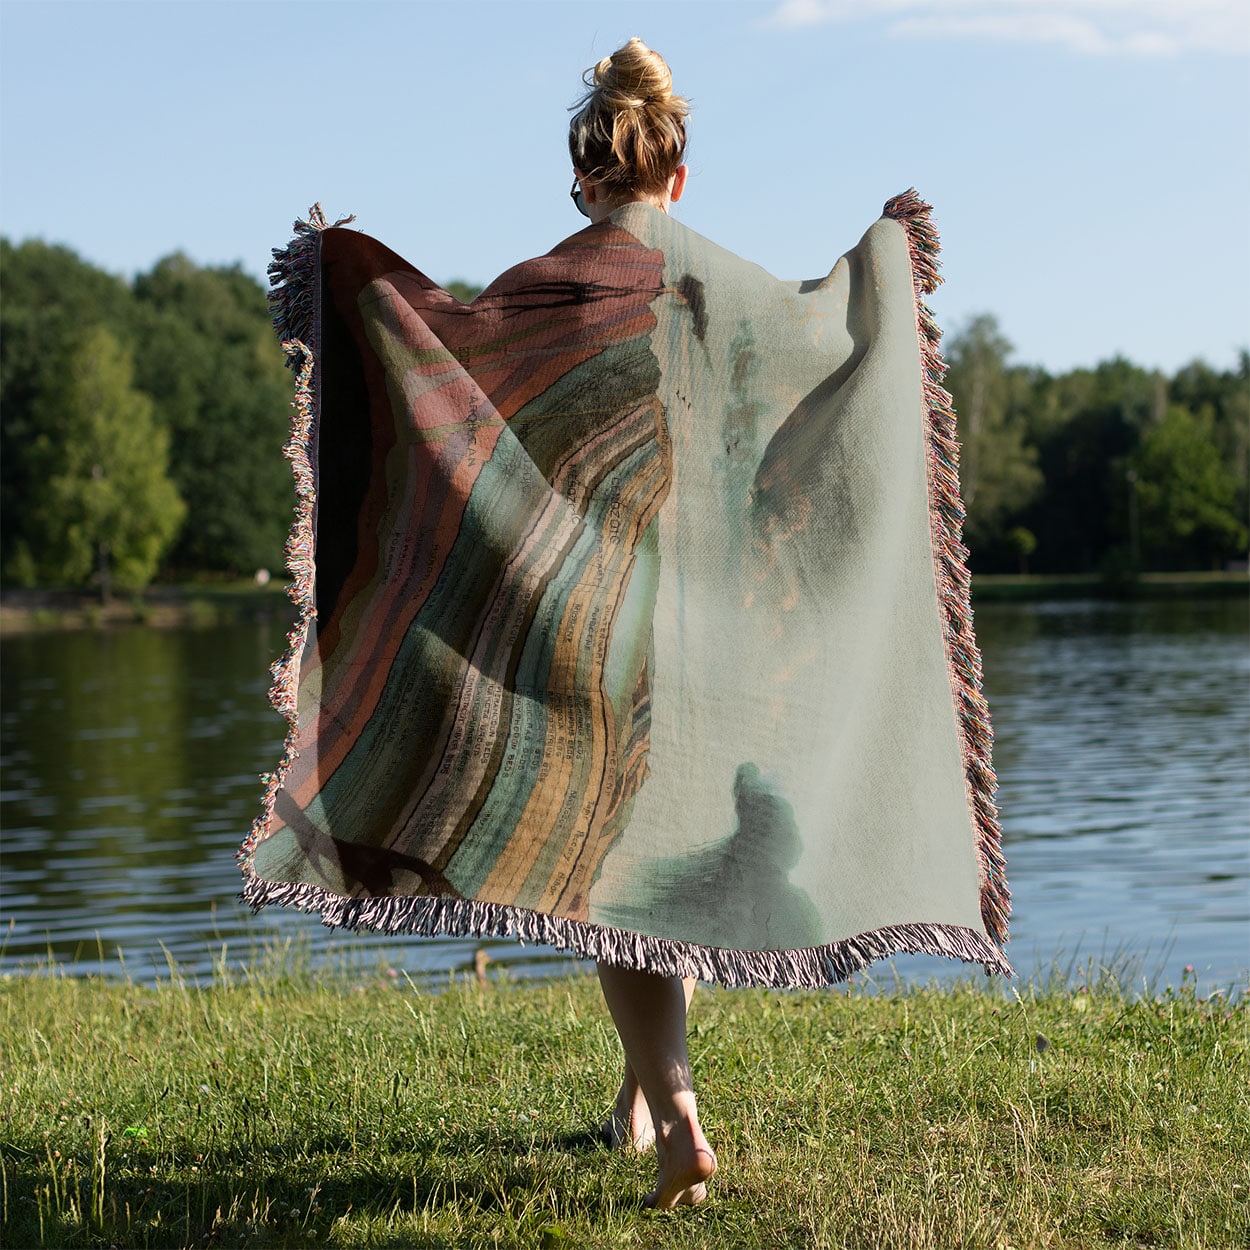 Layers of the Earth Woven Blanket Held on a Woman's Back Outside